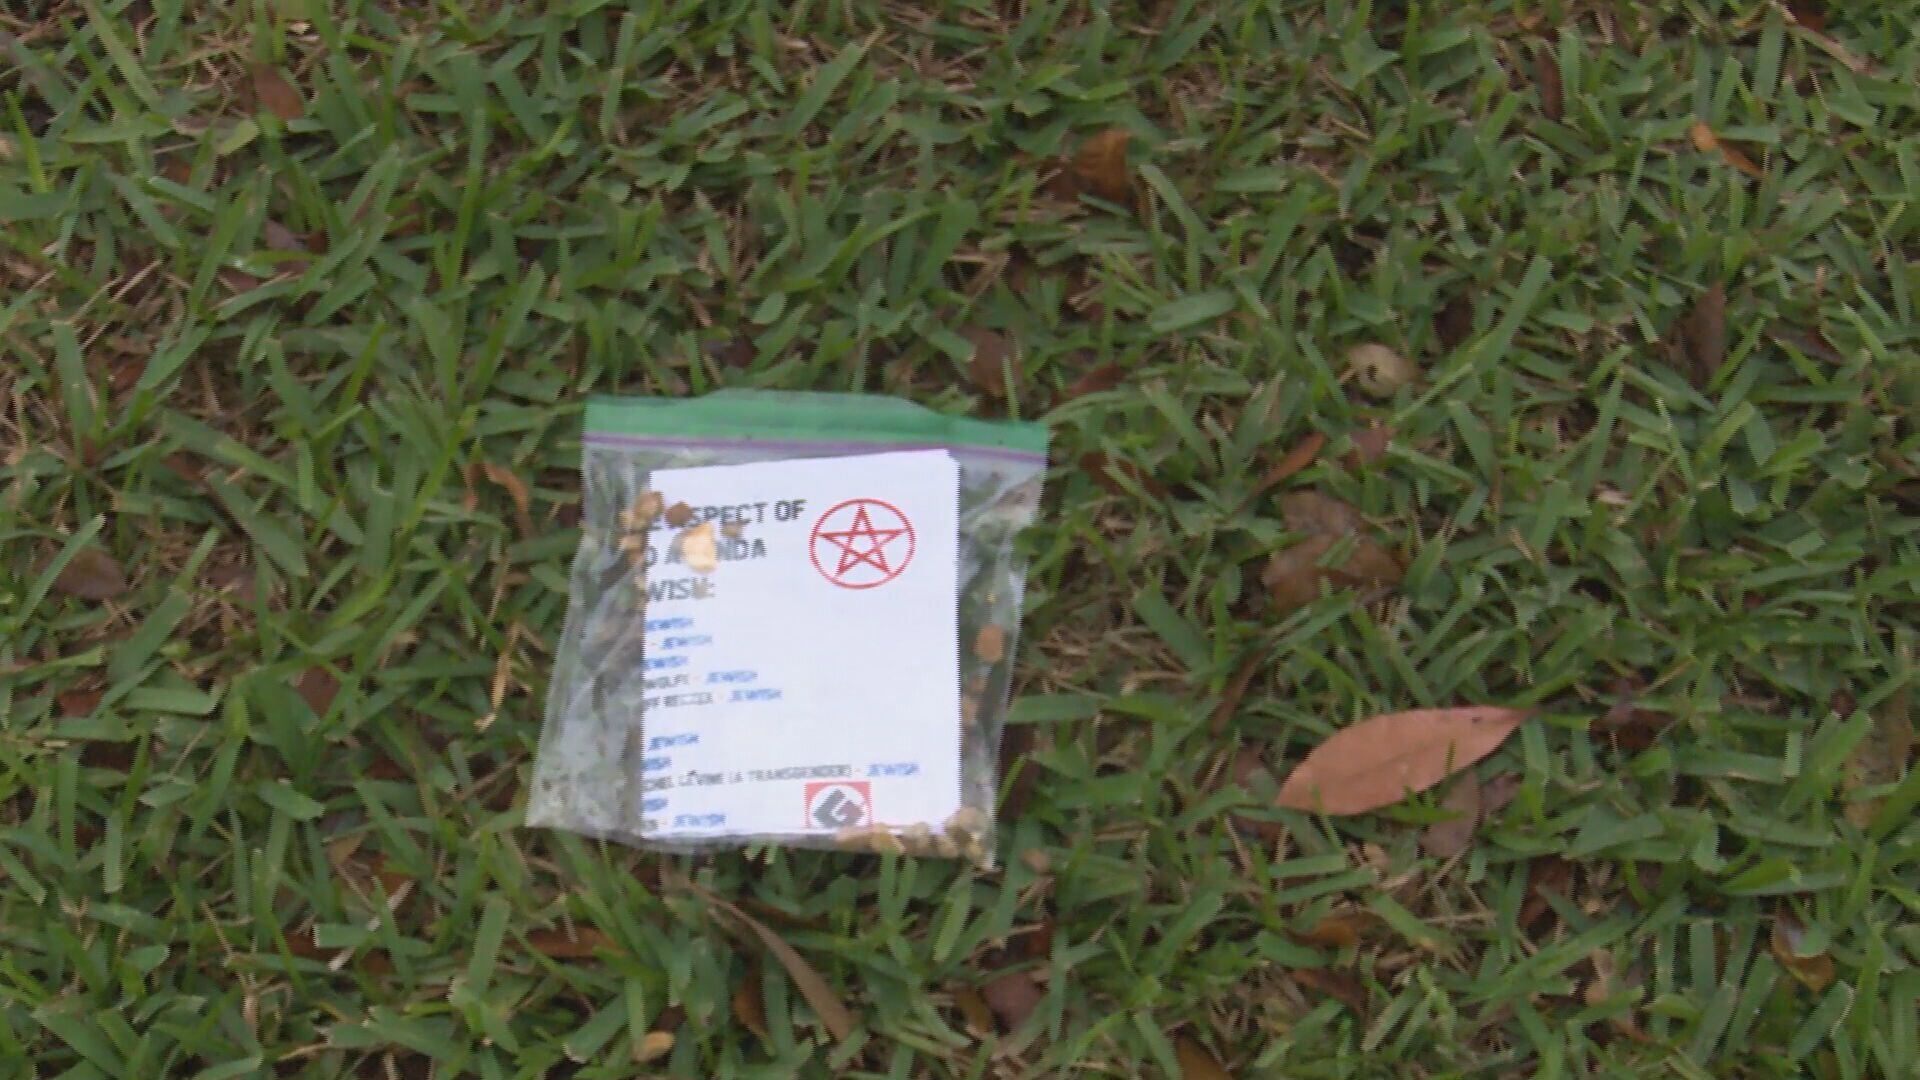 Antisemitic flyers found littering residential neighborhoods in Miami-Dade County